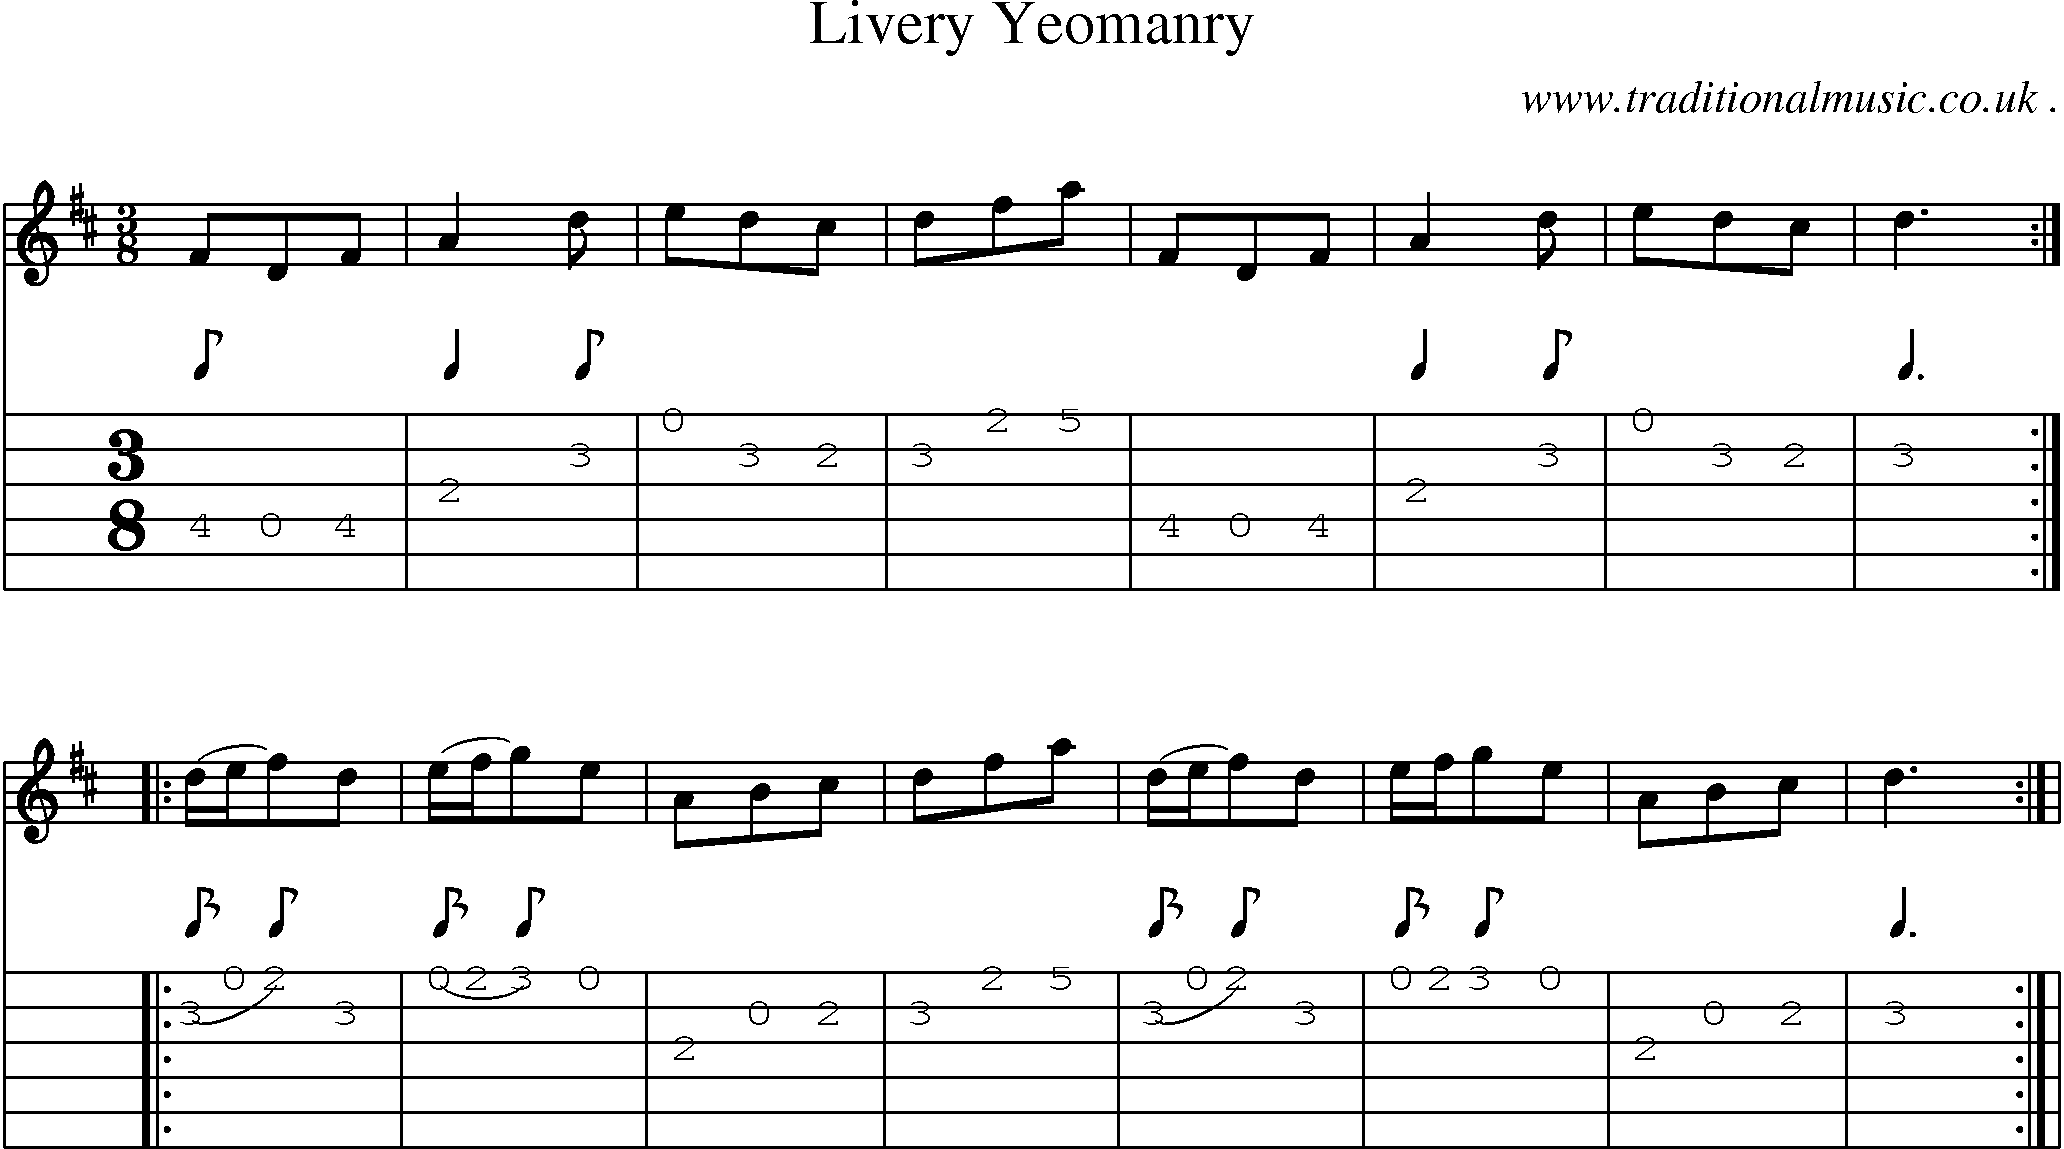 Sheet-Music and Guitar Tabs for Livery Yeomanry